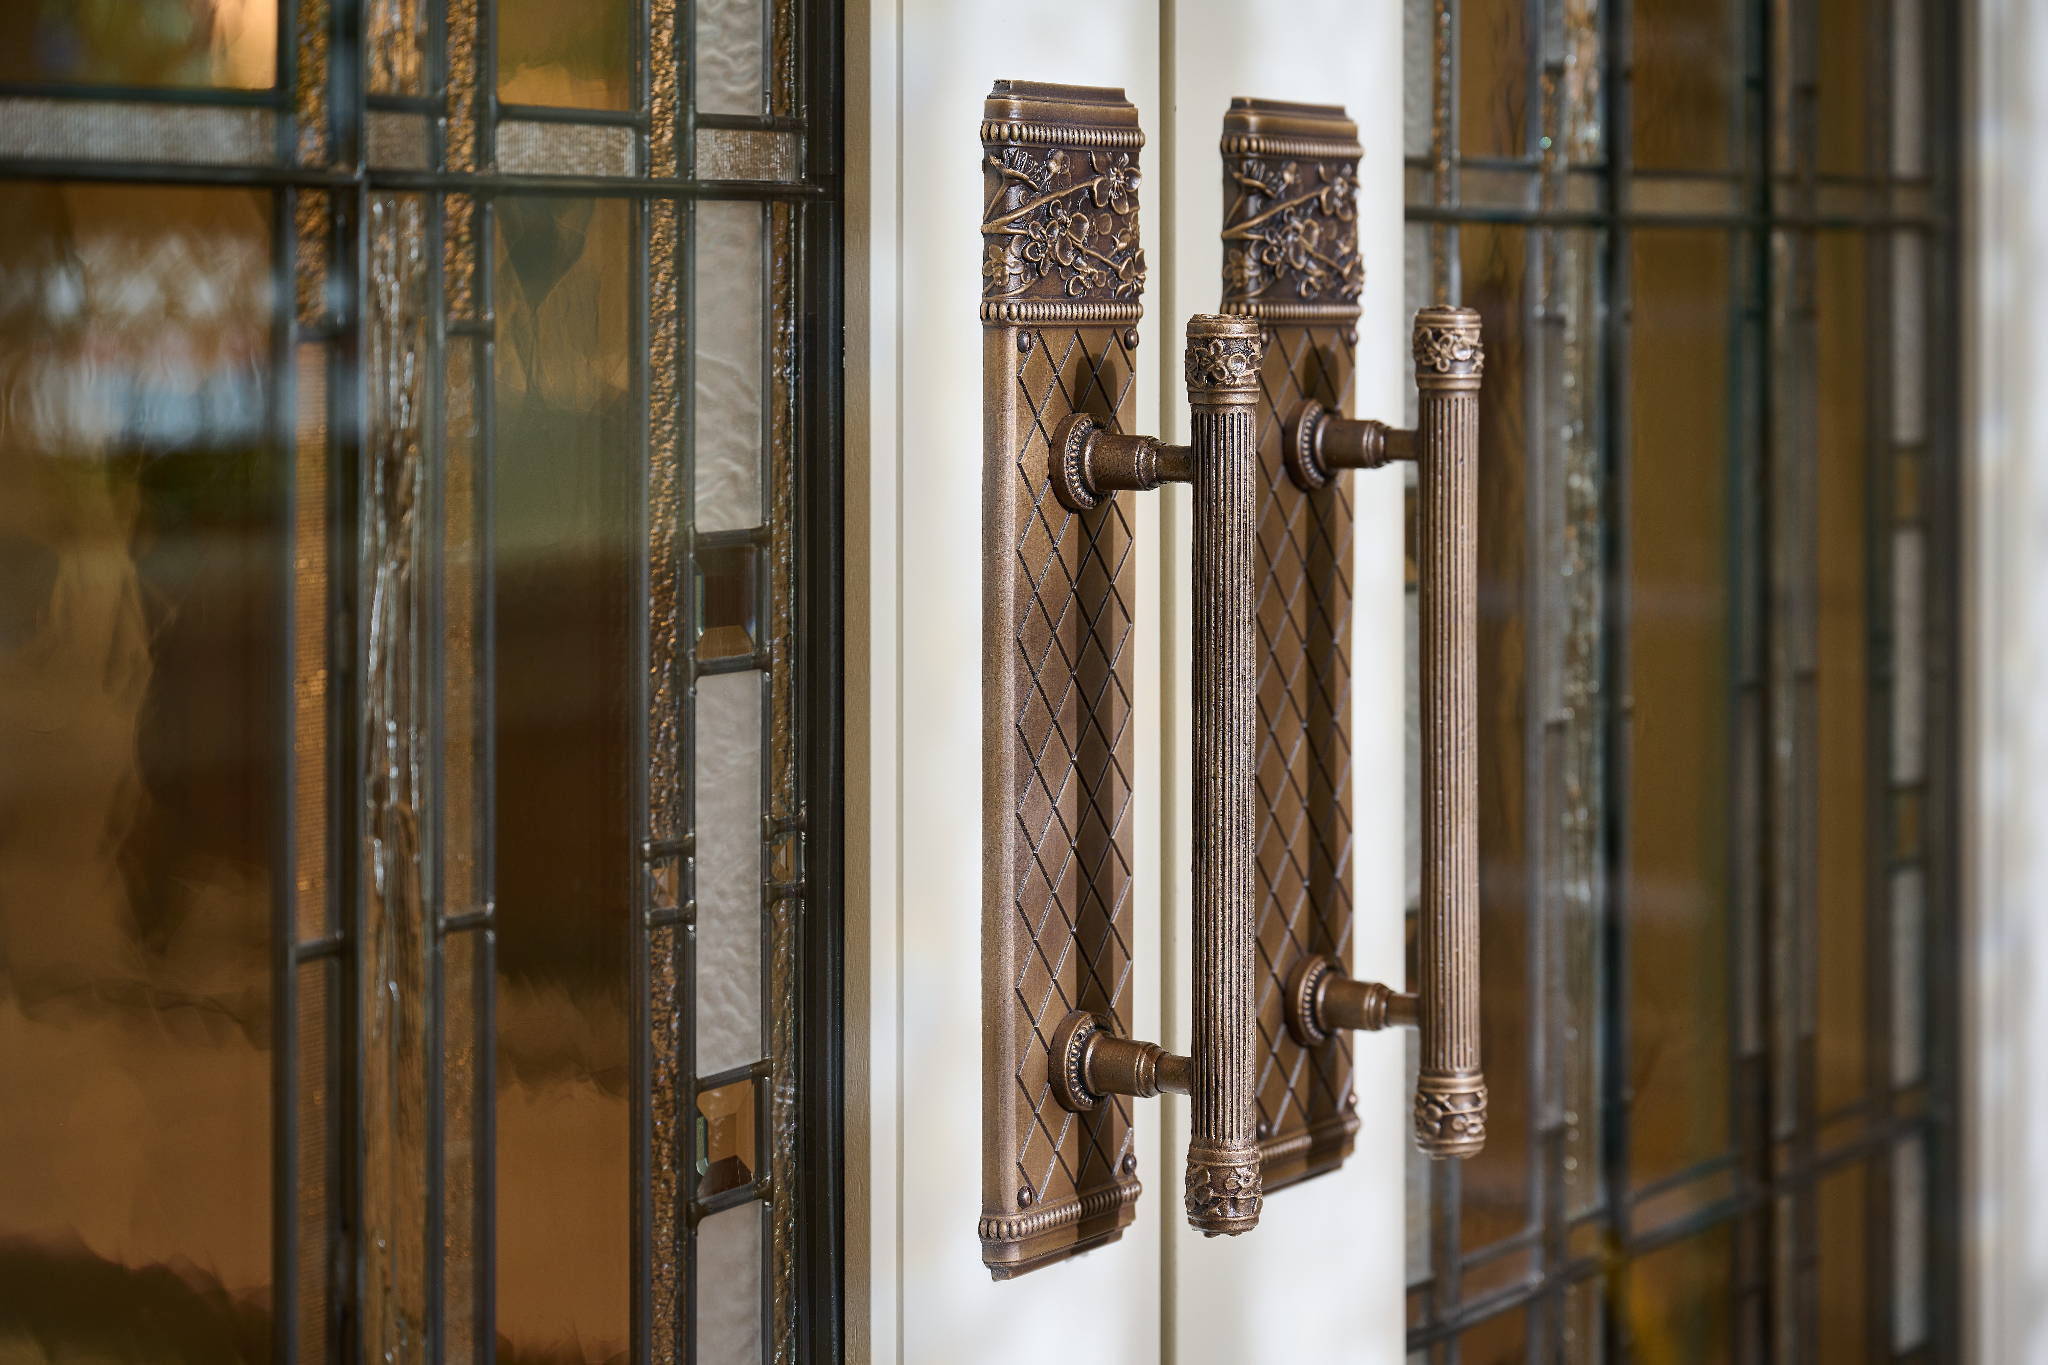 A close-up of metal door handles on doors with stained glass across it.